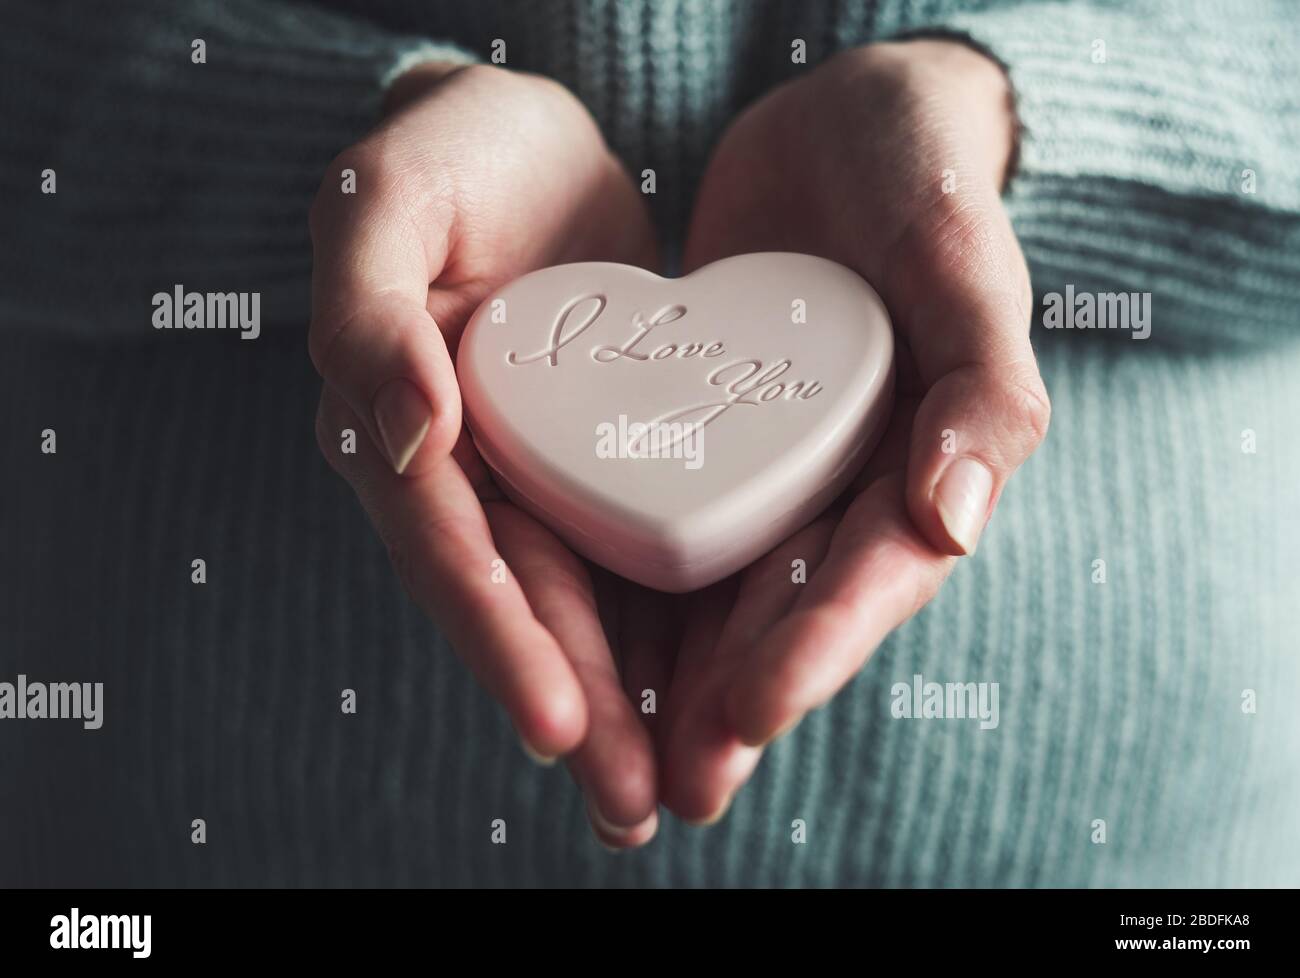 Soap in the shape of a heart in a girl's hand. Stock Photo